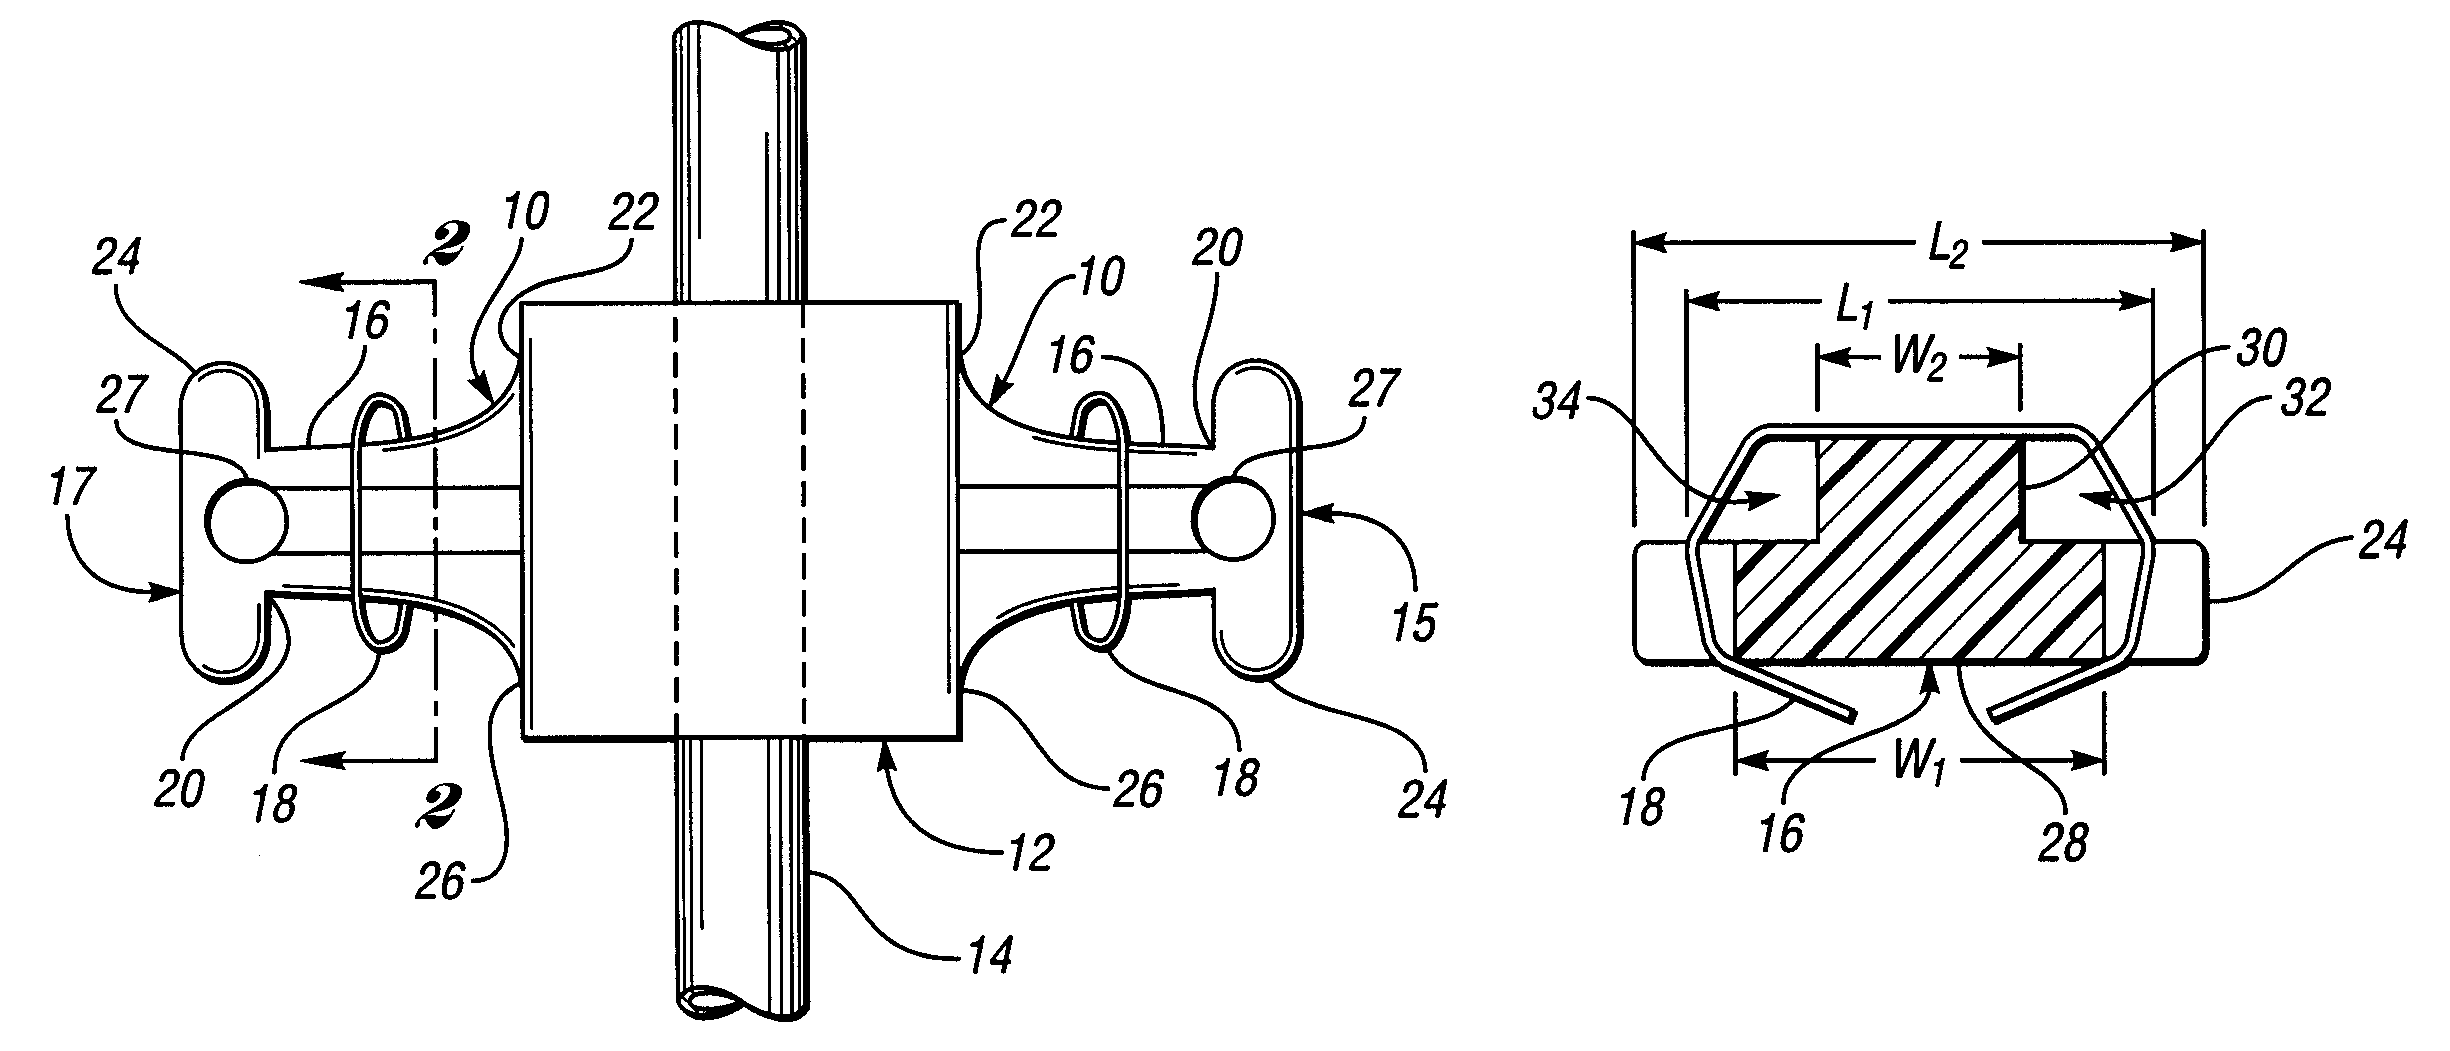 Fixation apparatus for a medical device